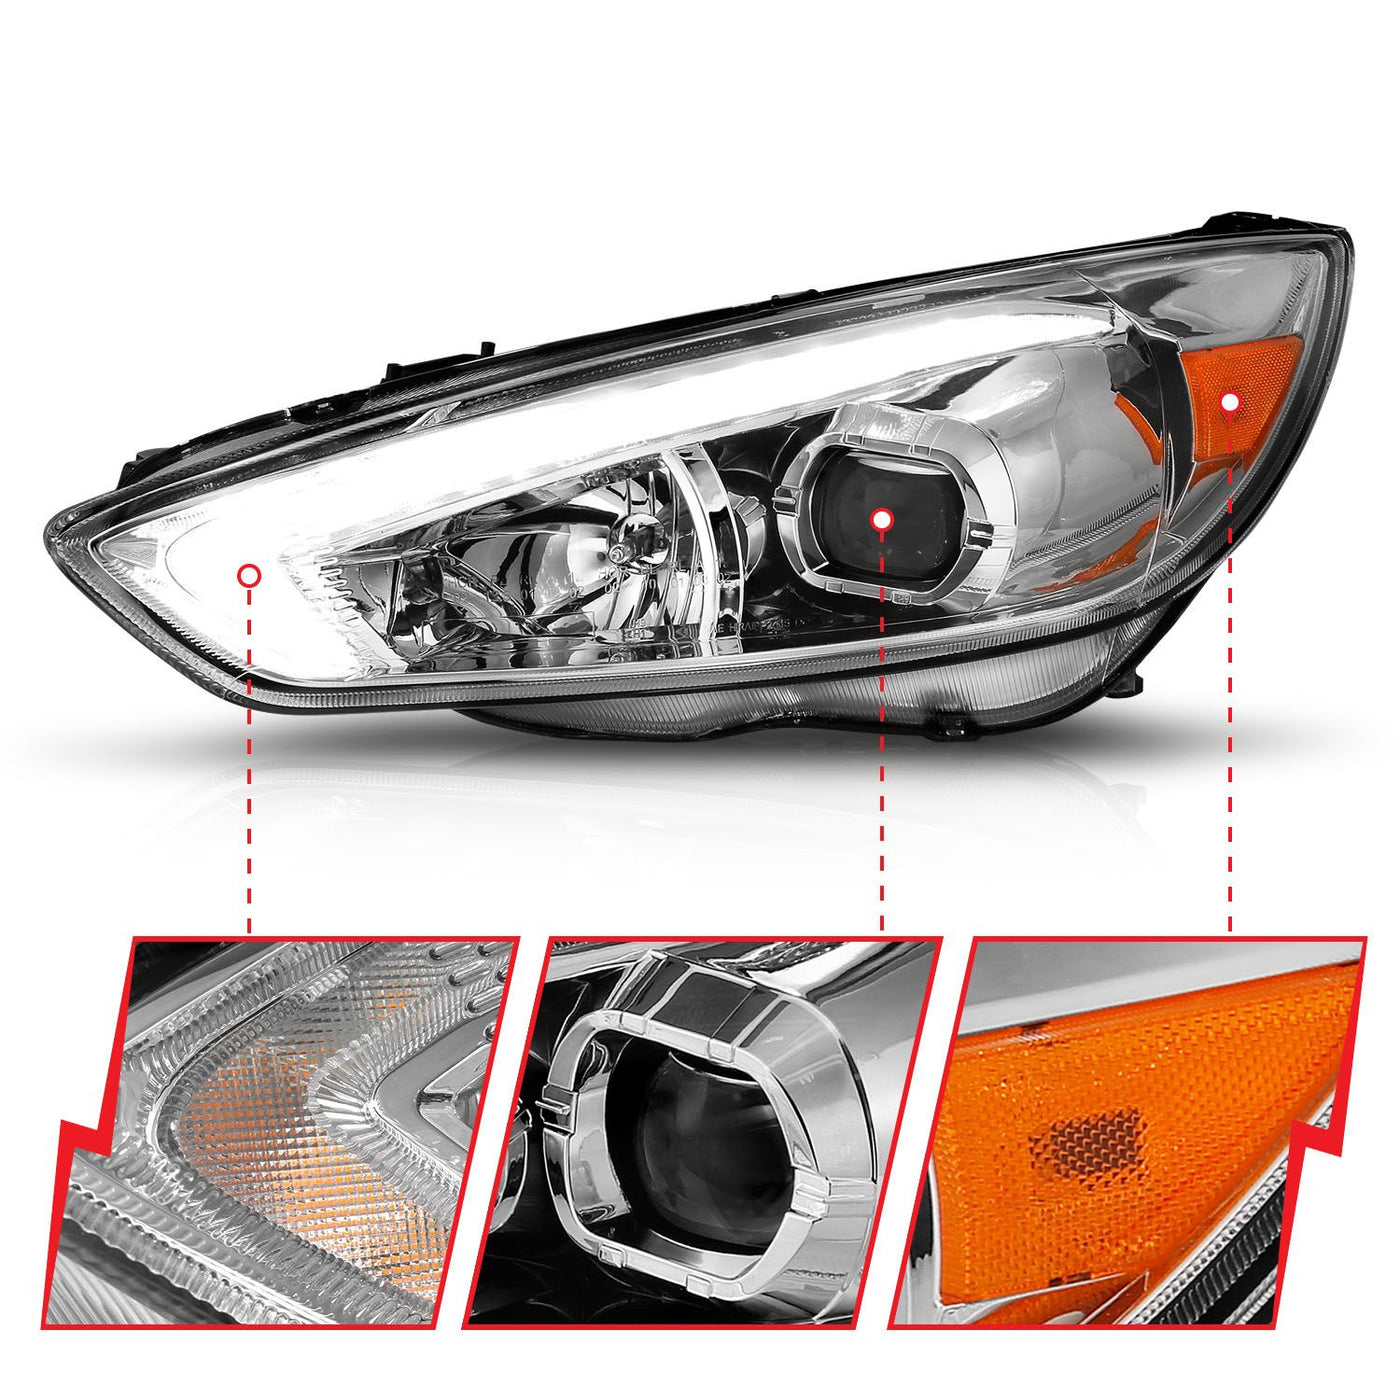 Ford Projector Headlights, Ford Focus Headlights, Ford 15-18 Headlights, Projector Headlights, Chrome Projector Headlights, Anzo Projector Headlights